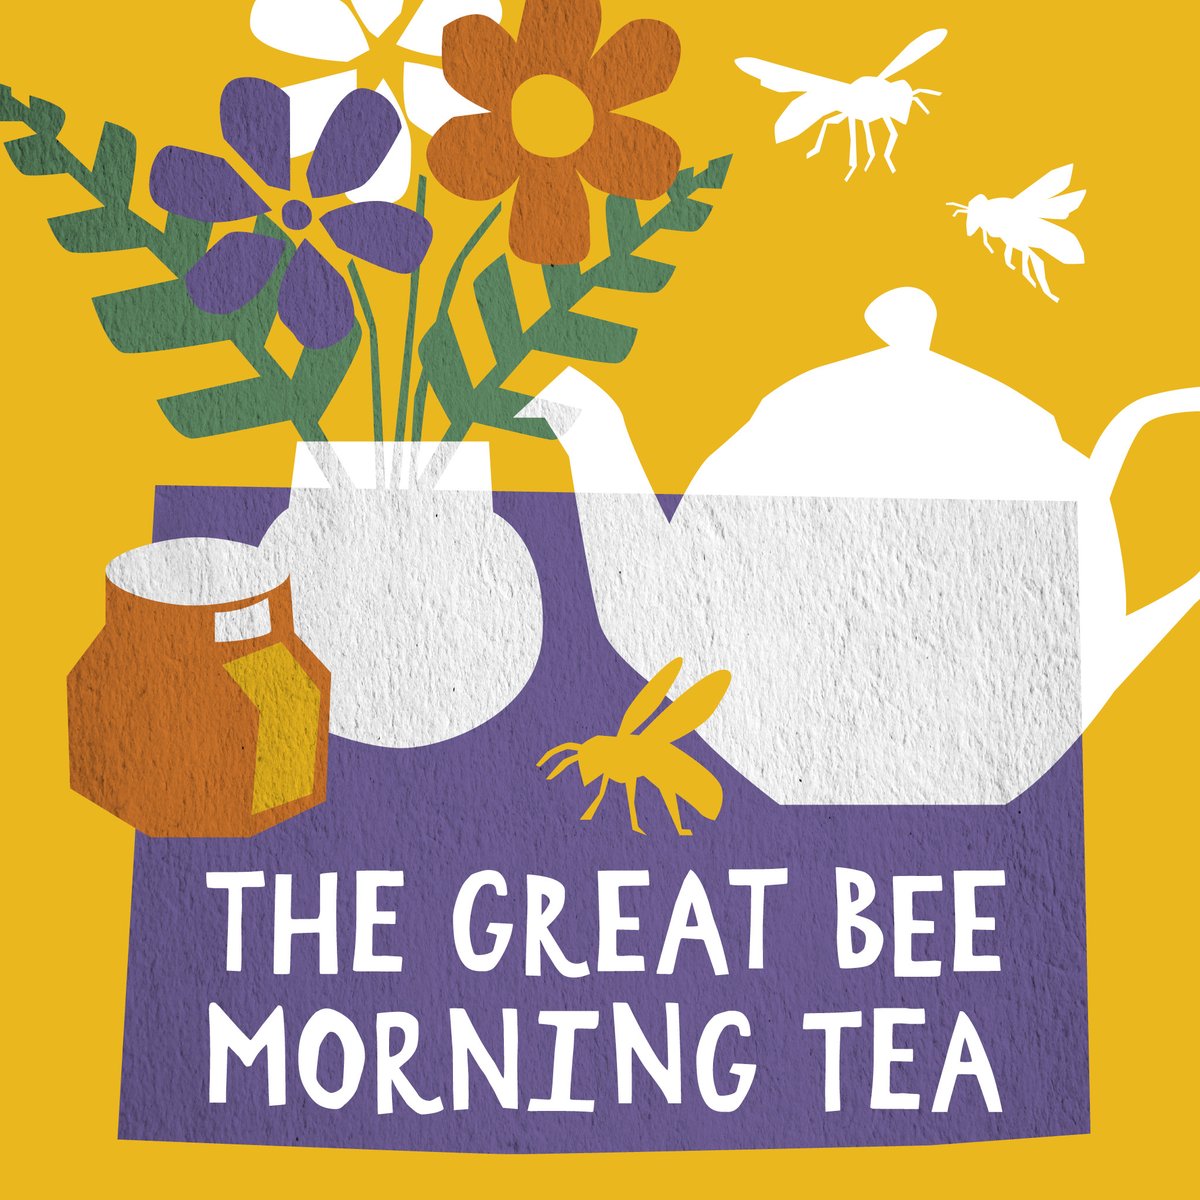 Make a sweet difference this World Bee Day with The Great Bee Morning Tea—a celebration to show support for Australian bees and beekeepers, and to recognise the vital role they play in food production, biodiversity and ecosystem health in Australia. Info - bit.ly/3whsQoC